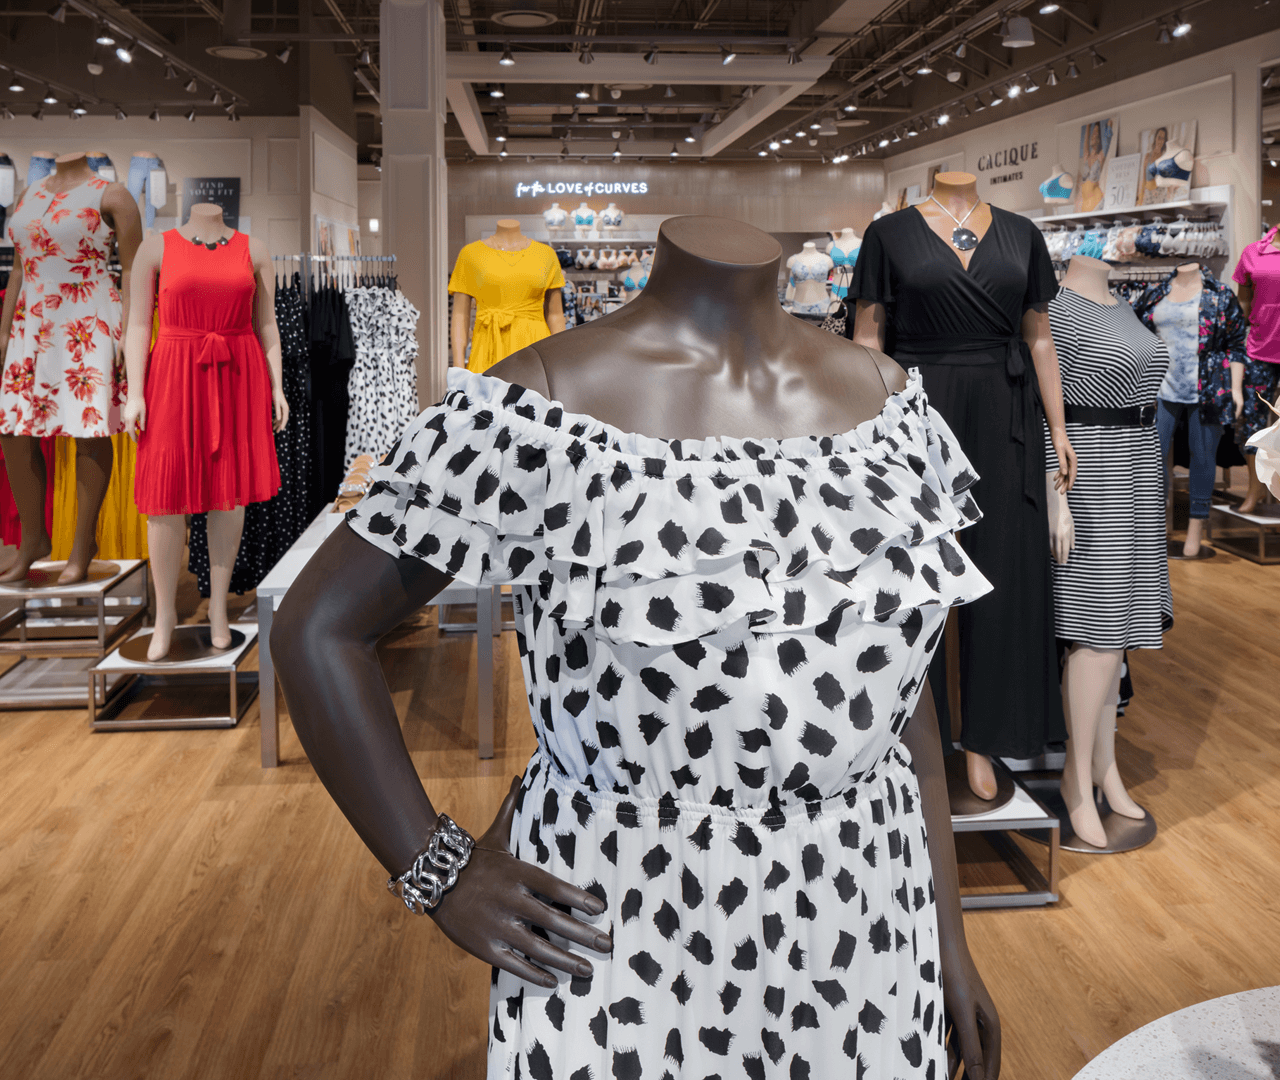 Why a New Set of Mannequins Appeared at Lane Bryant